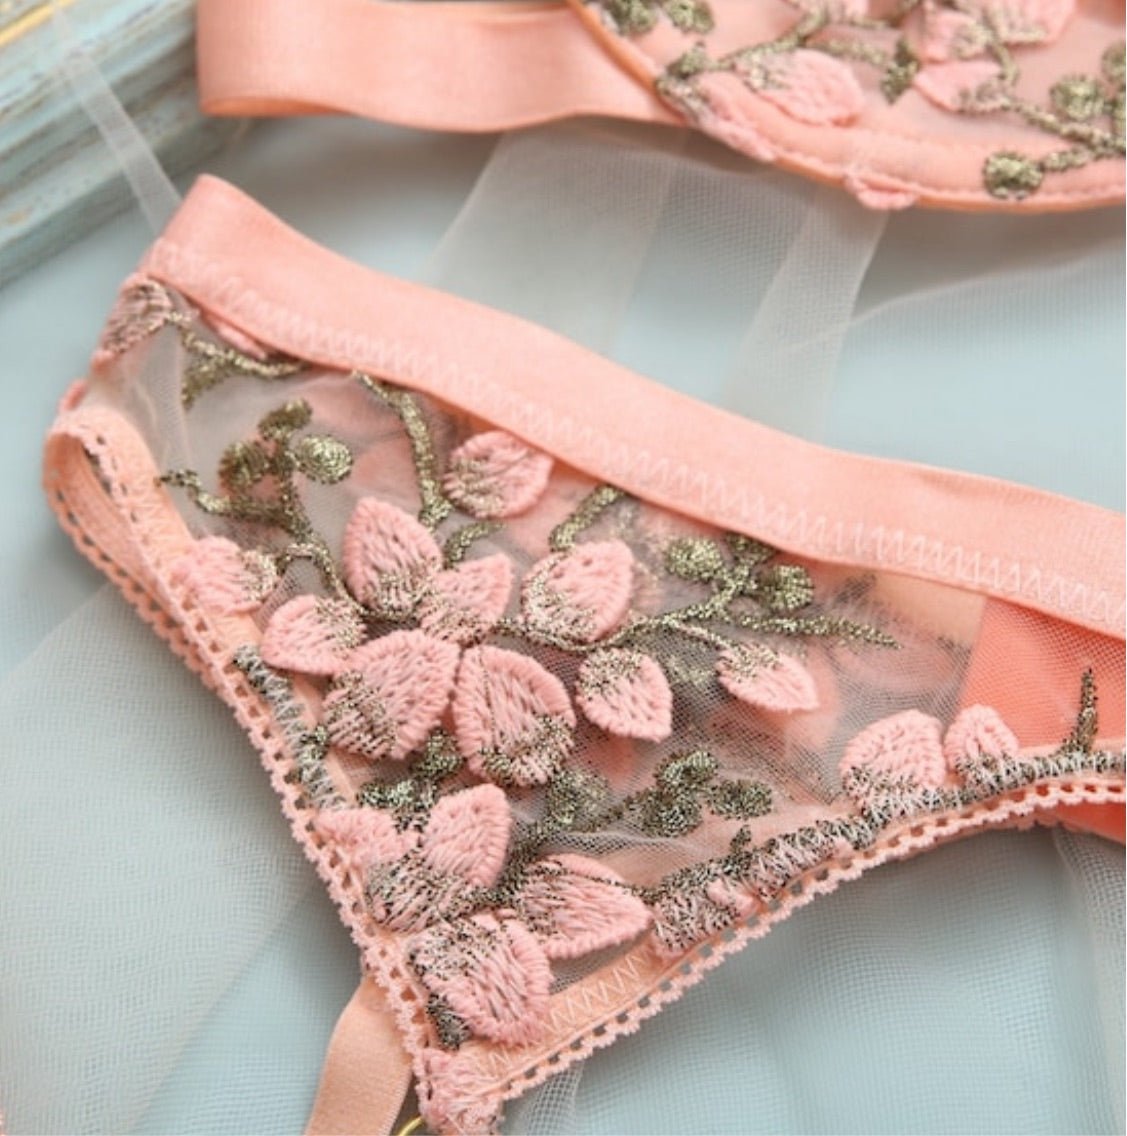 embroidered lingerie